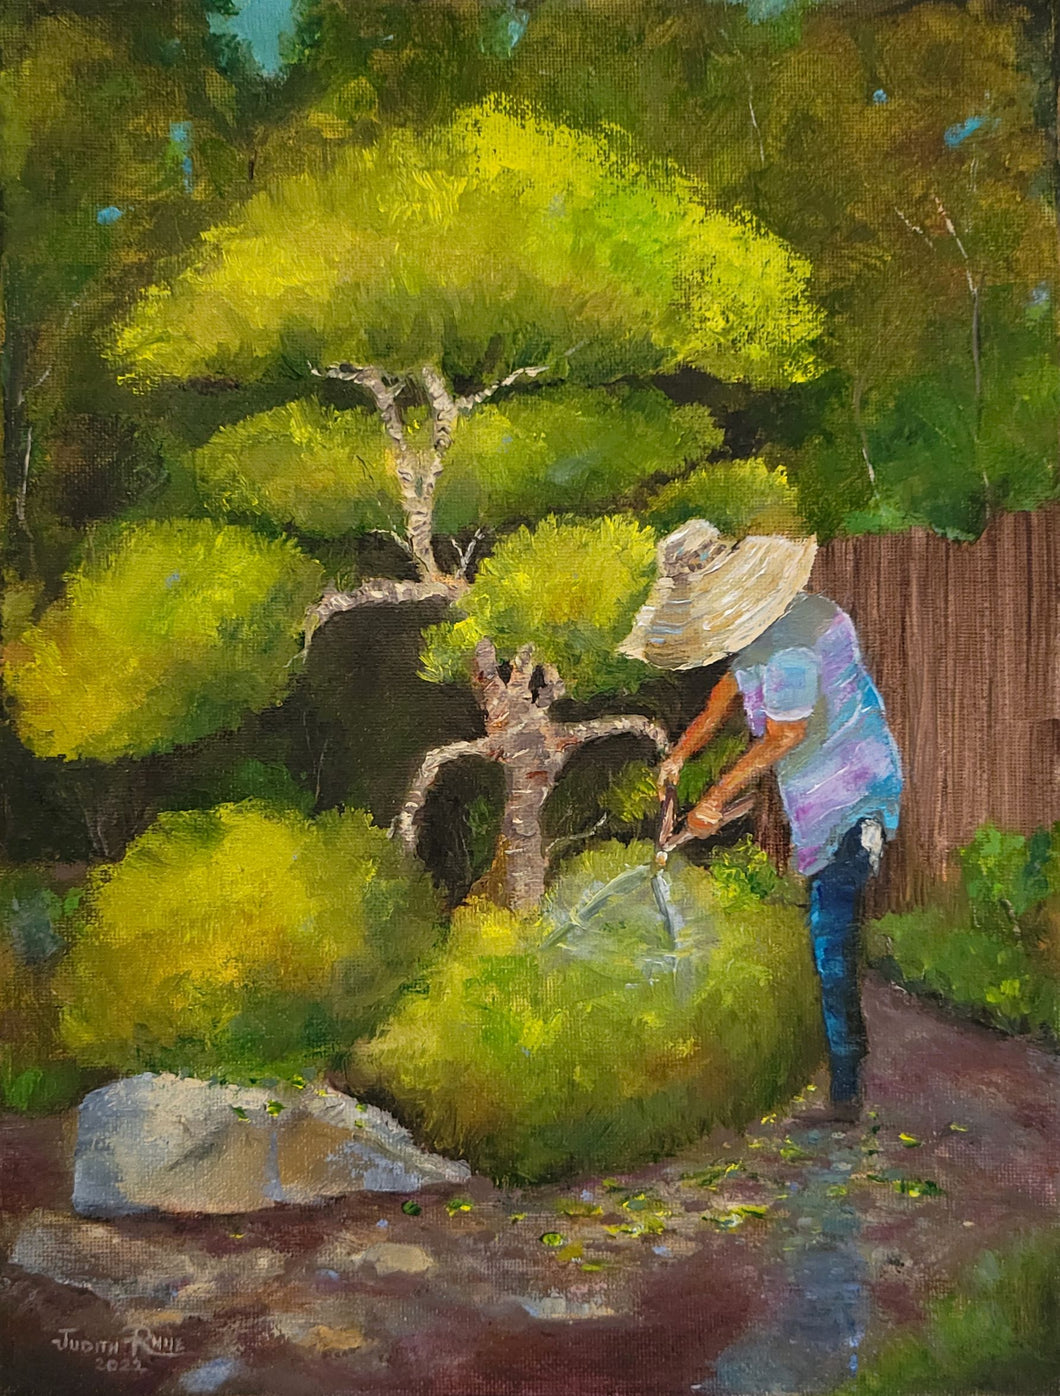 Topiary Artist - original oil painting landscape gardener people topiary garden worker man tree canvas artwork oil paintings on canvas decoration home decor